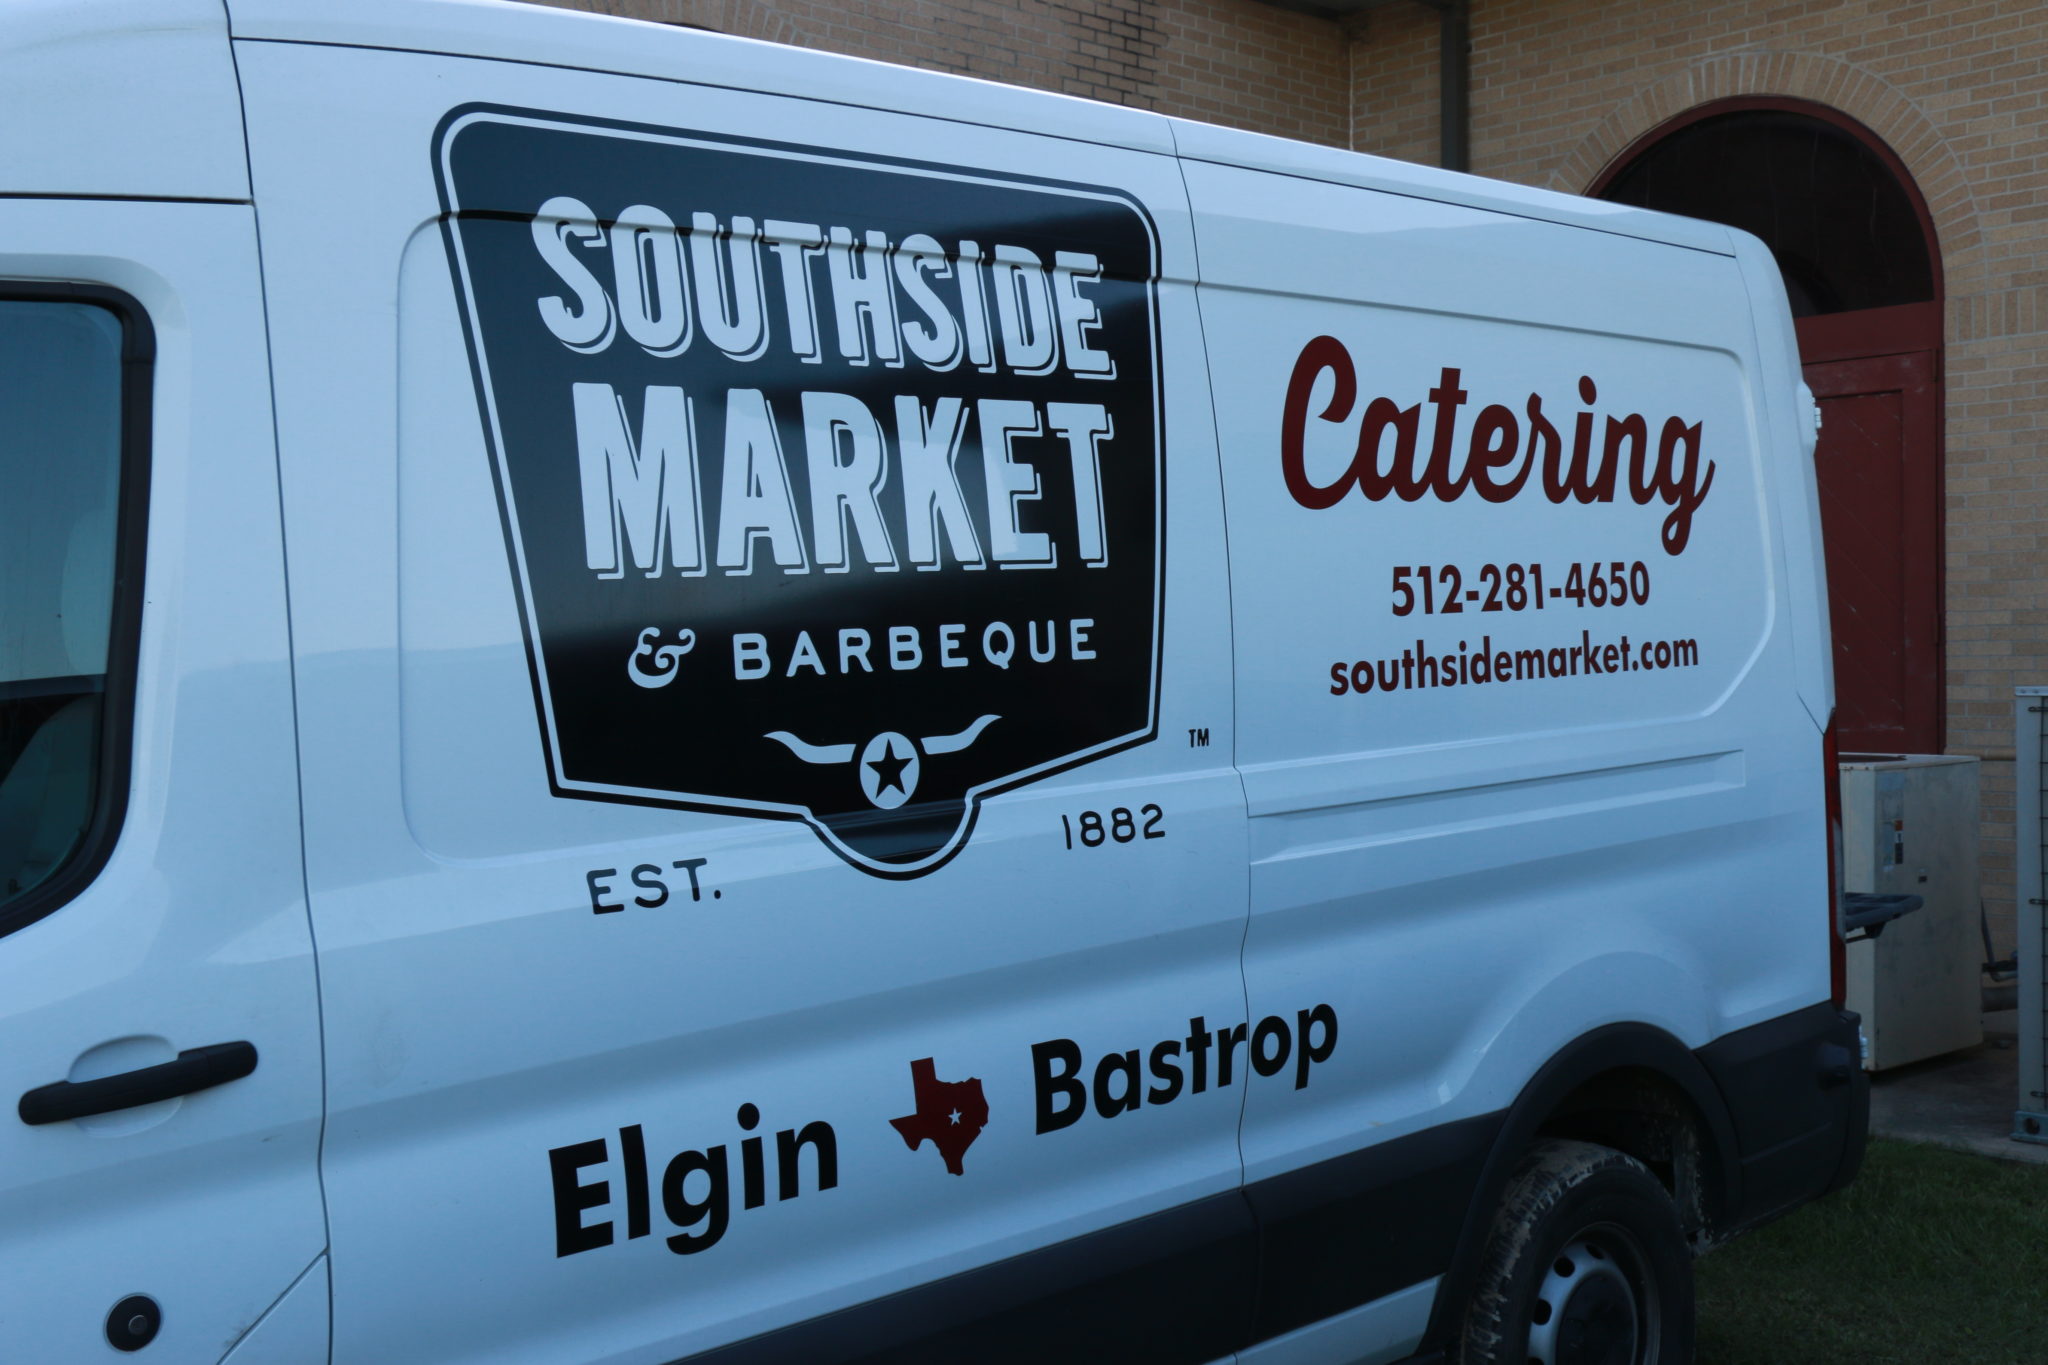 Southside Market and Barbeque